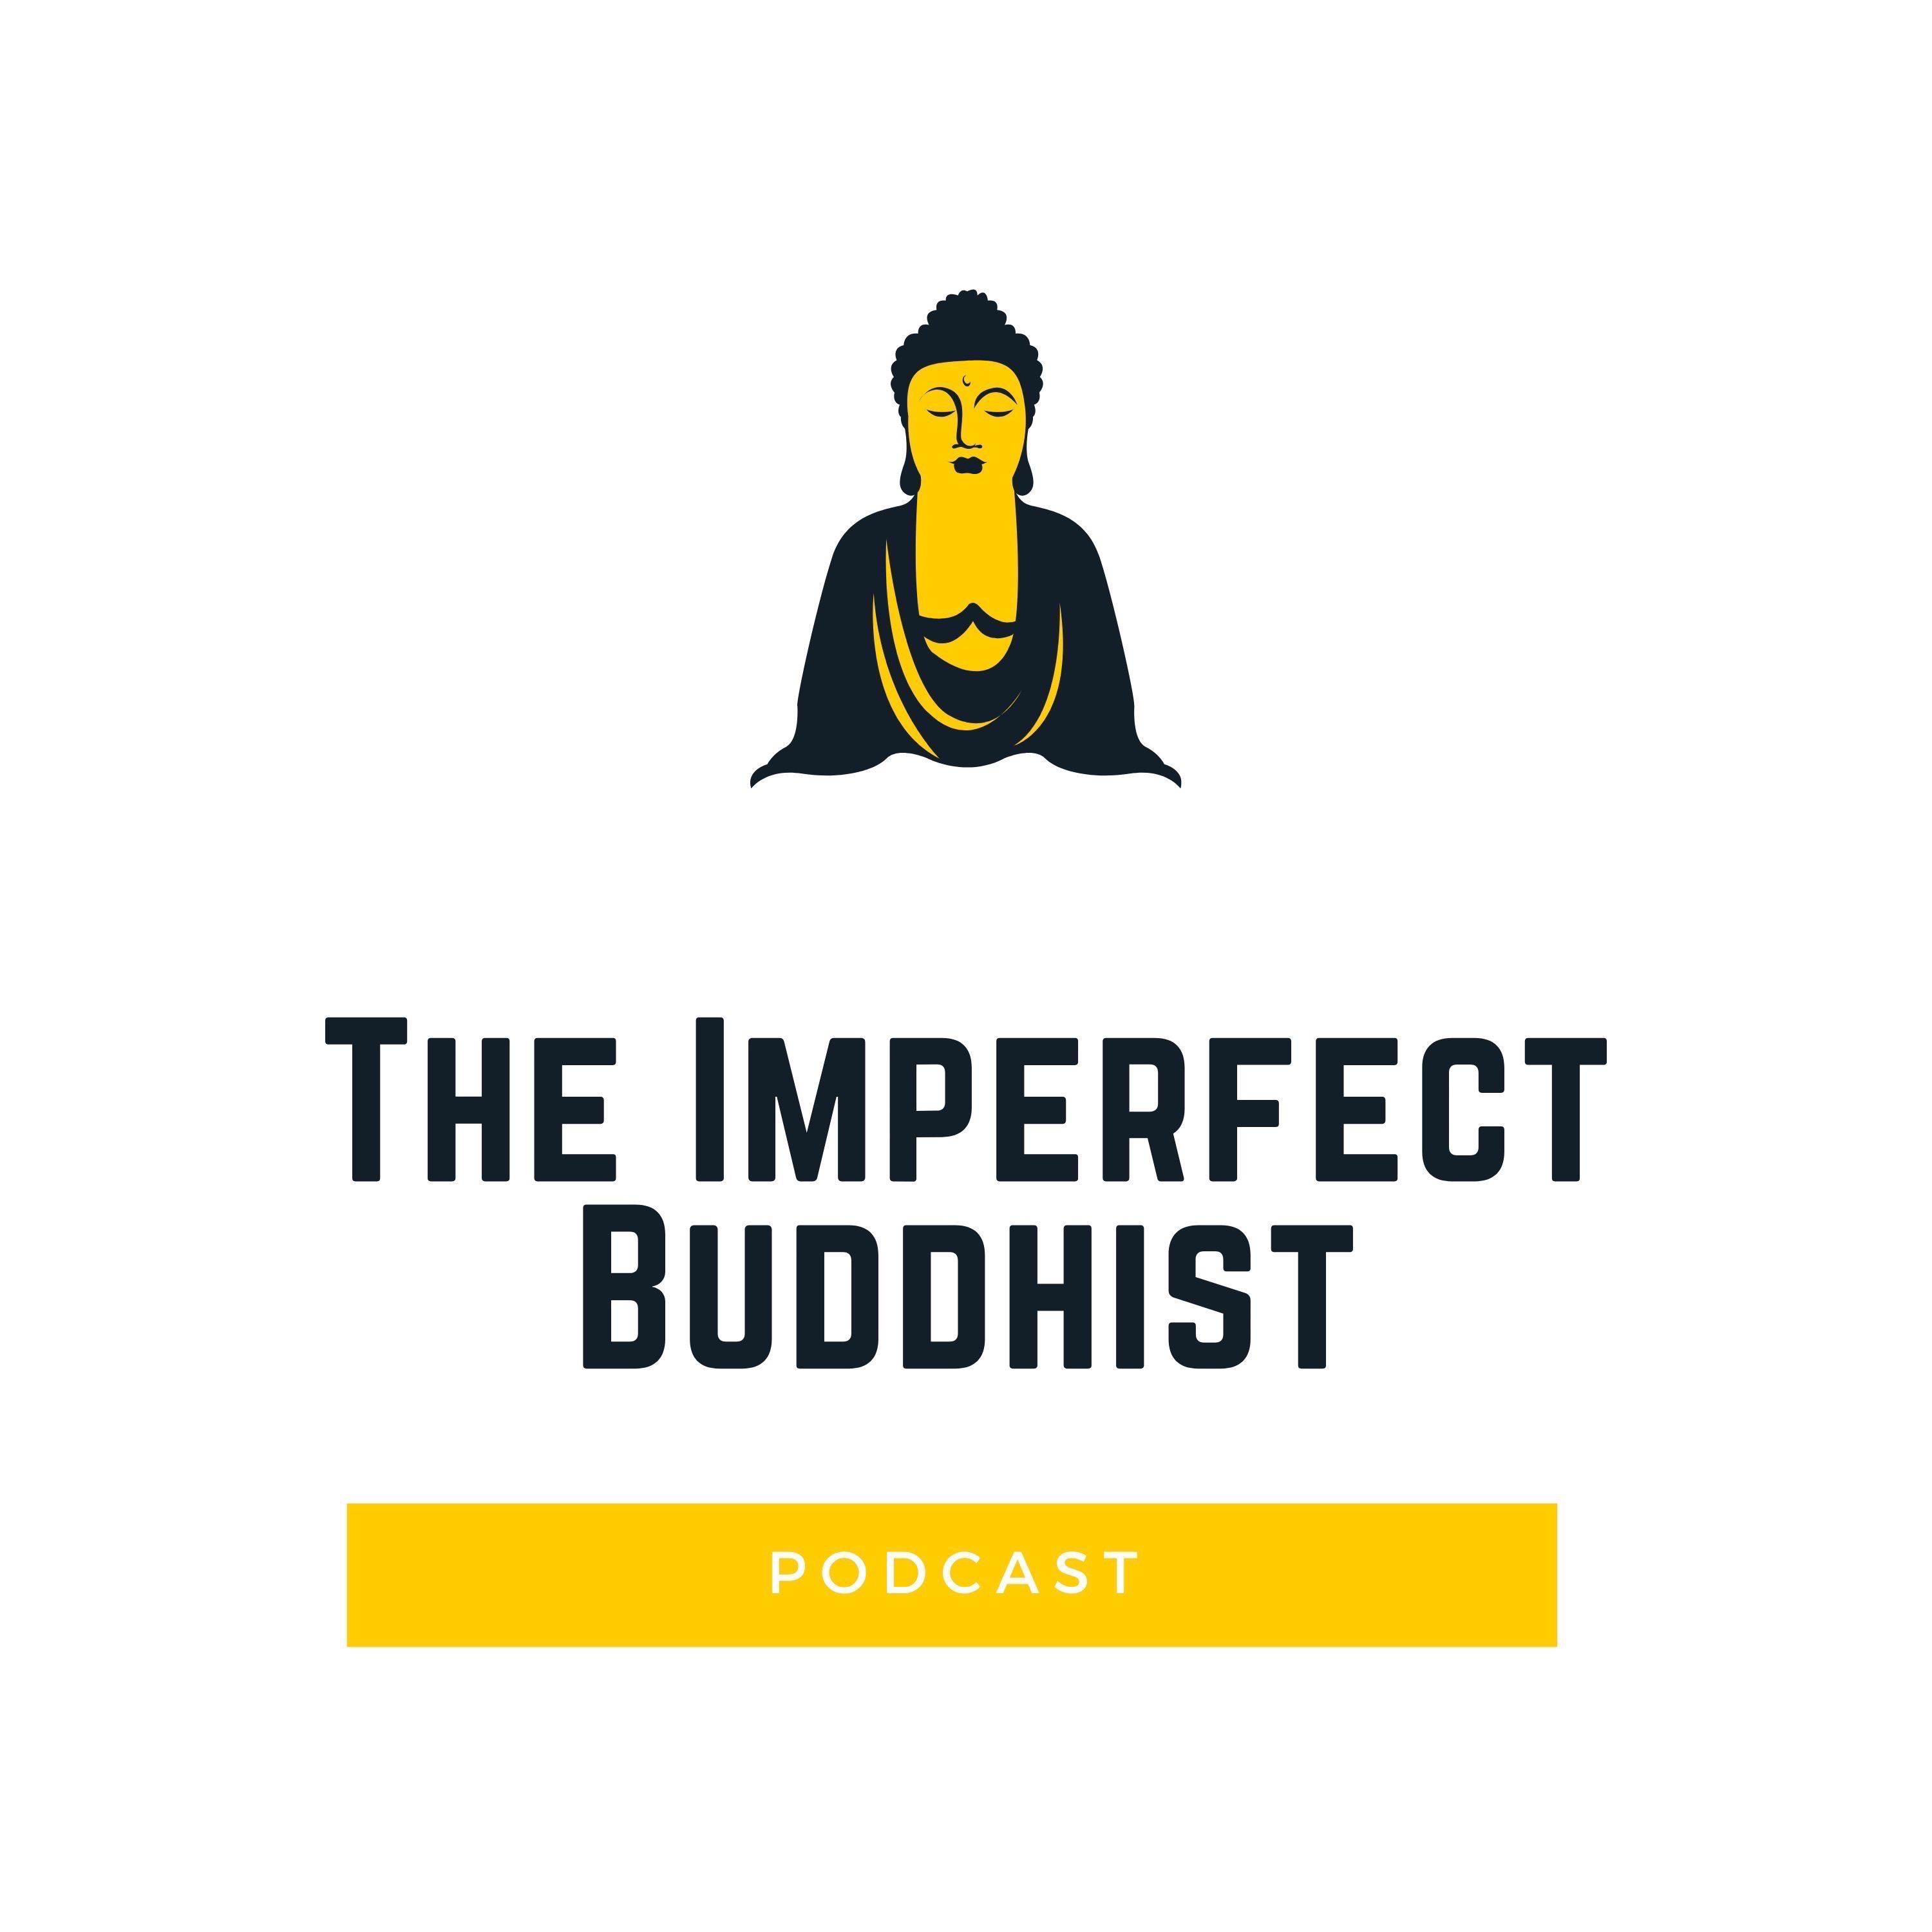 The Imperfect Buddhist